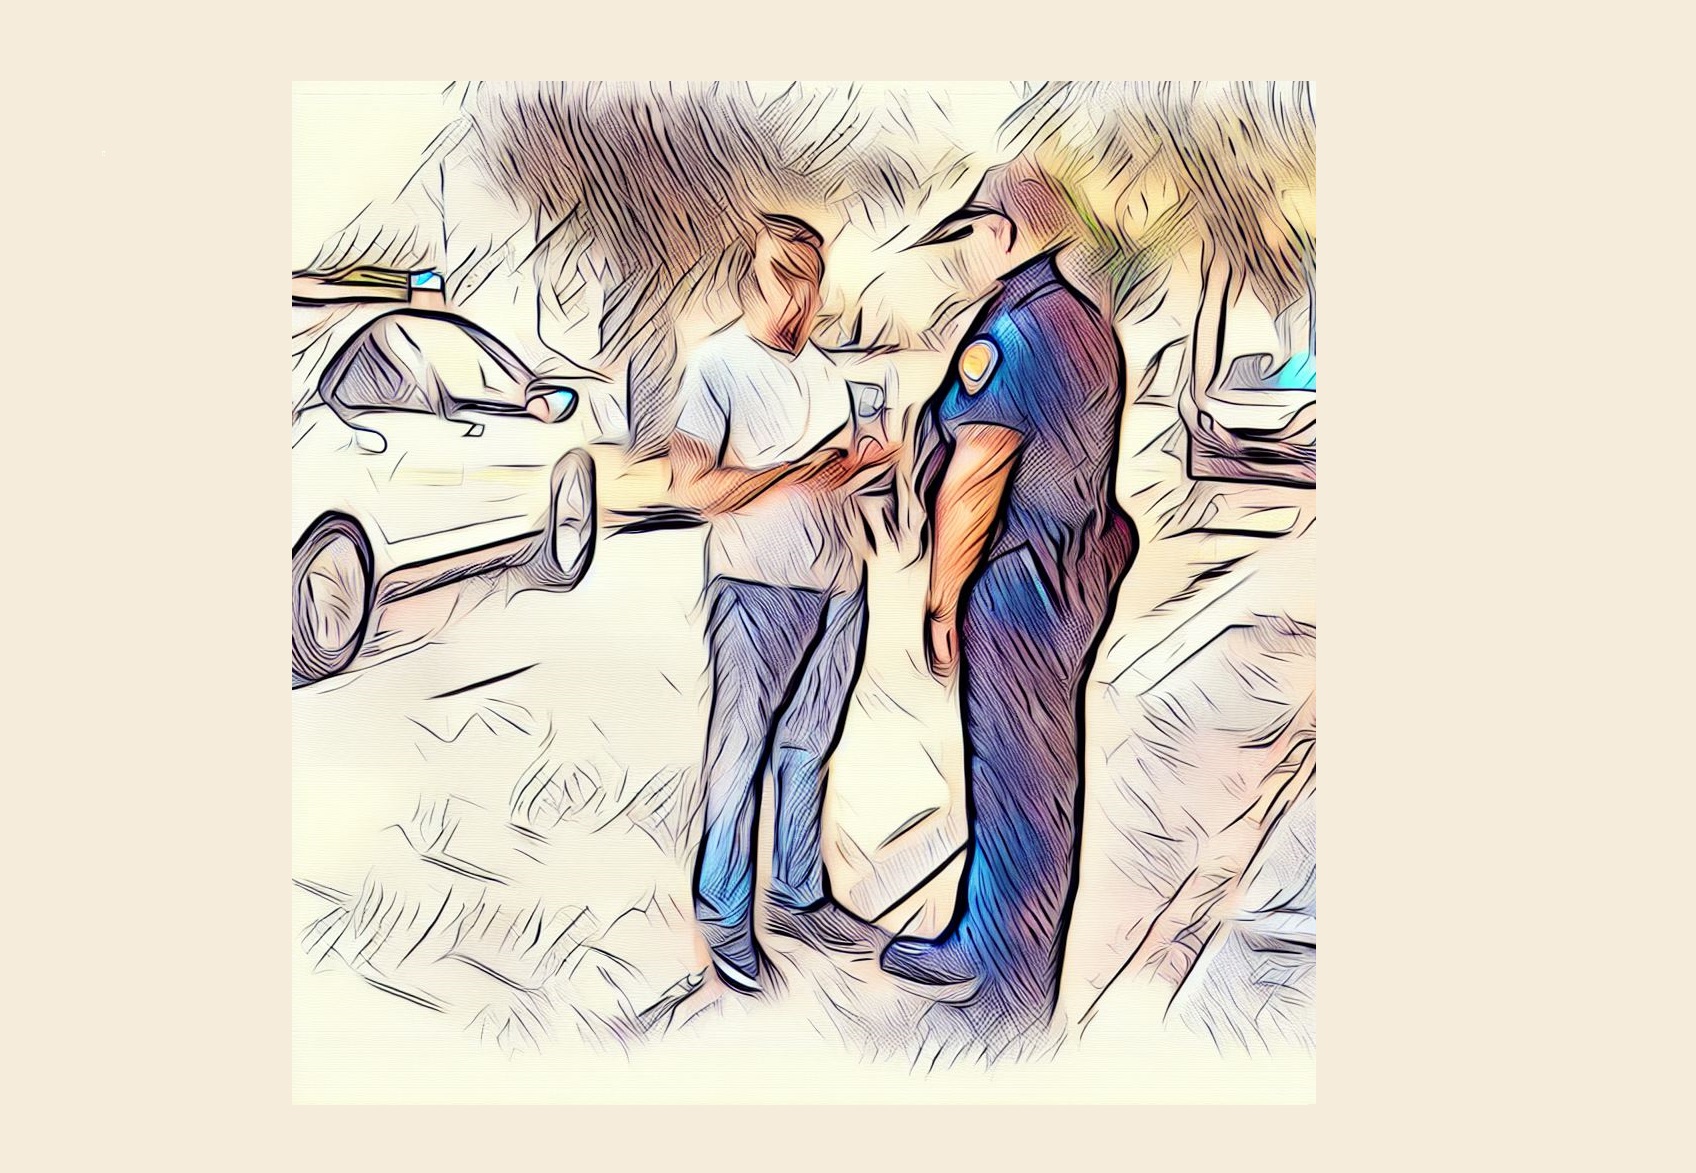 police officer in miami speaking with person